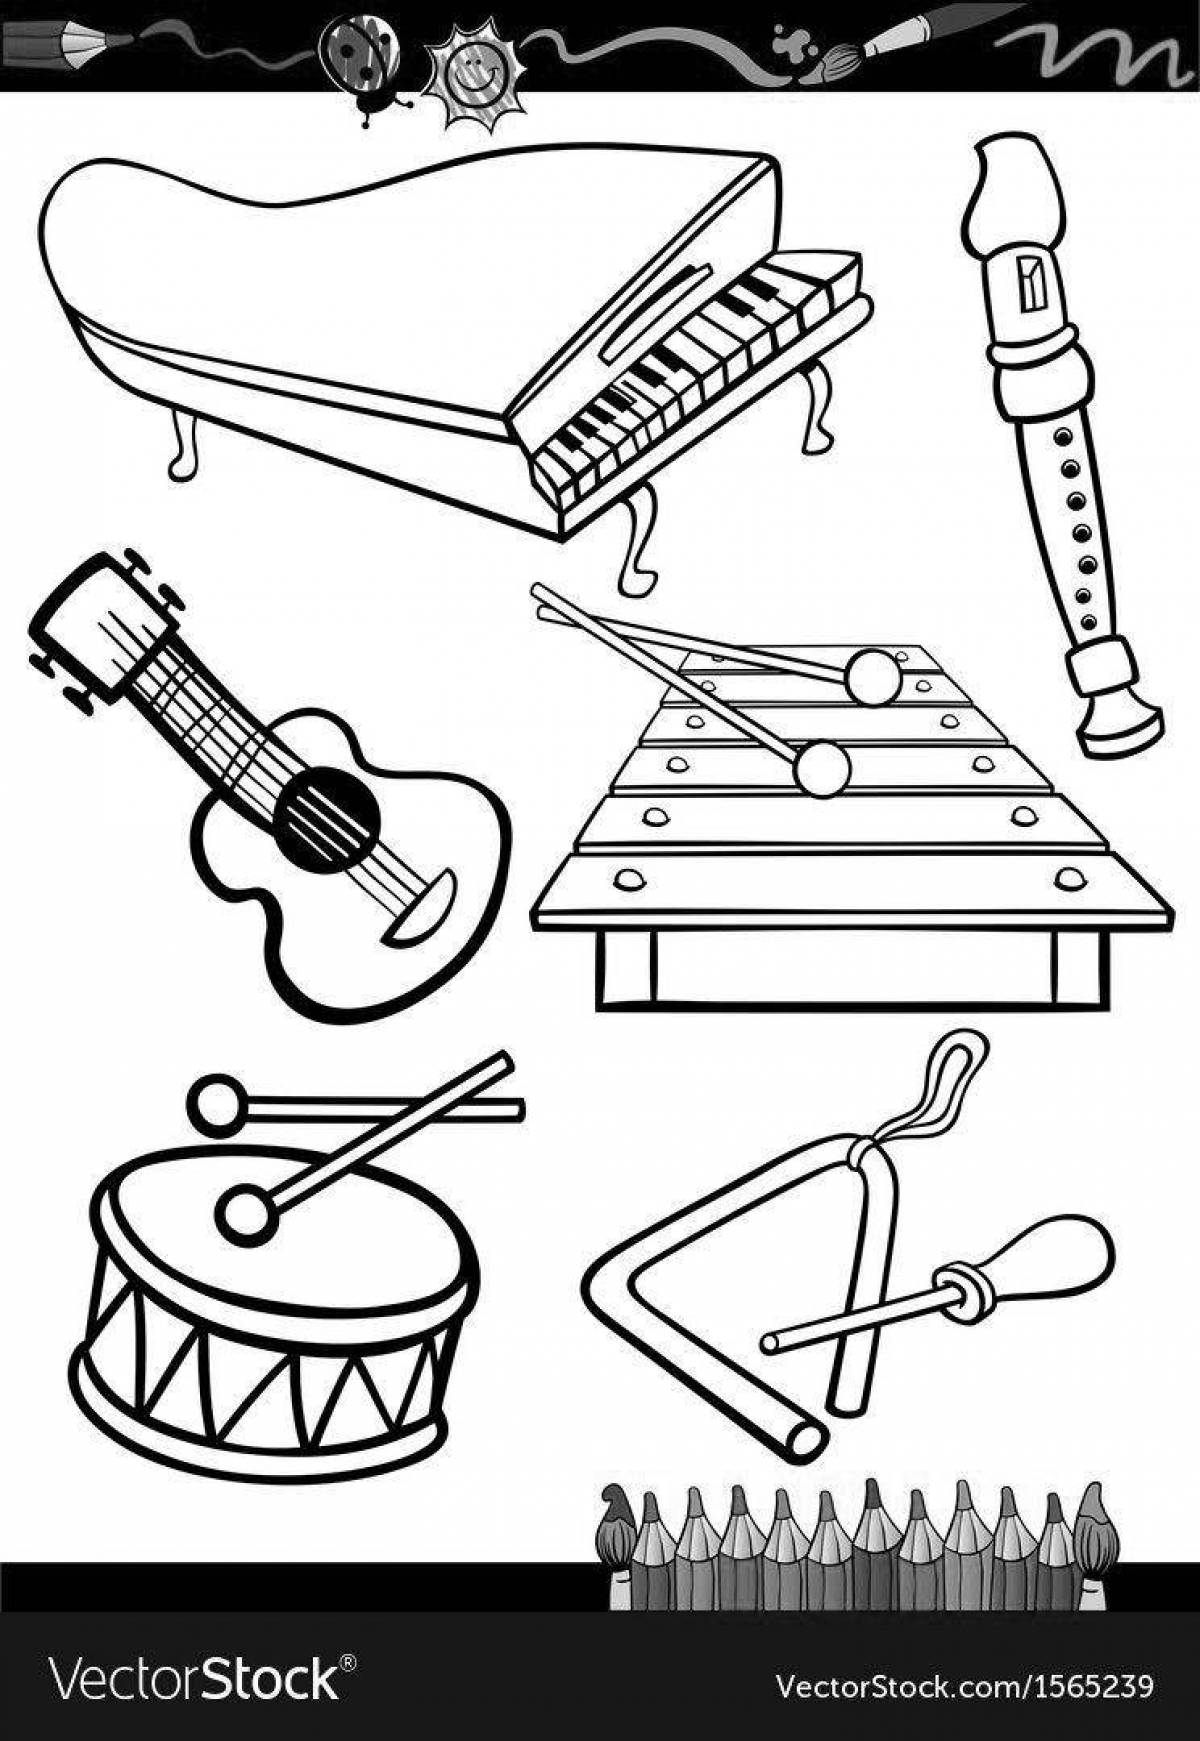 Creative musical instruments coloring book for preschoolers